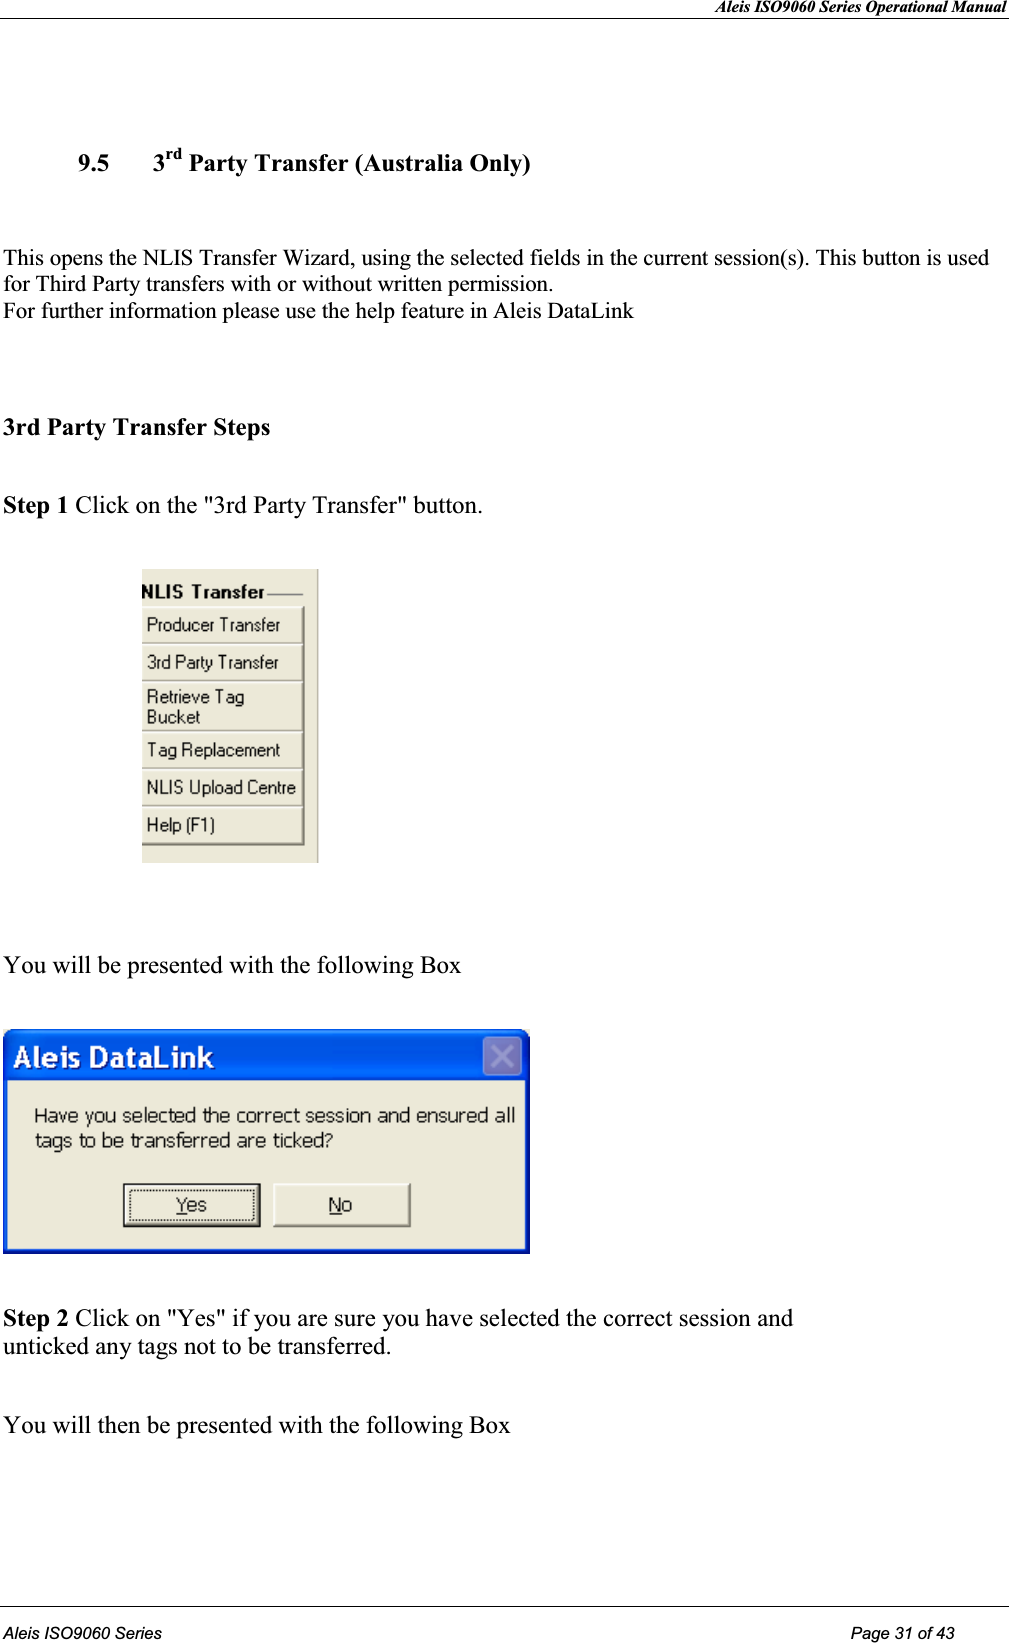 Aleis ISO9060 Series Operational Manual  Aleis ISO9060 Series Page 31 of 43    9.5 3rd Party Transfer (Australia Only)   This opens the NLIS Transfer Wizard, using the selected fields in the current session(s). This button is used for Third Party transfers with or without written permission.                                                                                   For further information please use the help feature in Aleis DataLink   3rd Party Transfer Steps  Step 1 Click on the &quot;3rd Party Transfer&quot; button.                          You will be presented with the following Box    Step 2 Click on &quot;Yes&quot; if you are sure you have selected the correct session and                                      unticked any tags not to be transferred.   You will then be presented with the following Box  